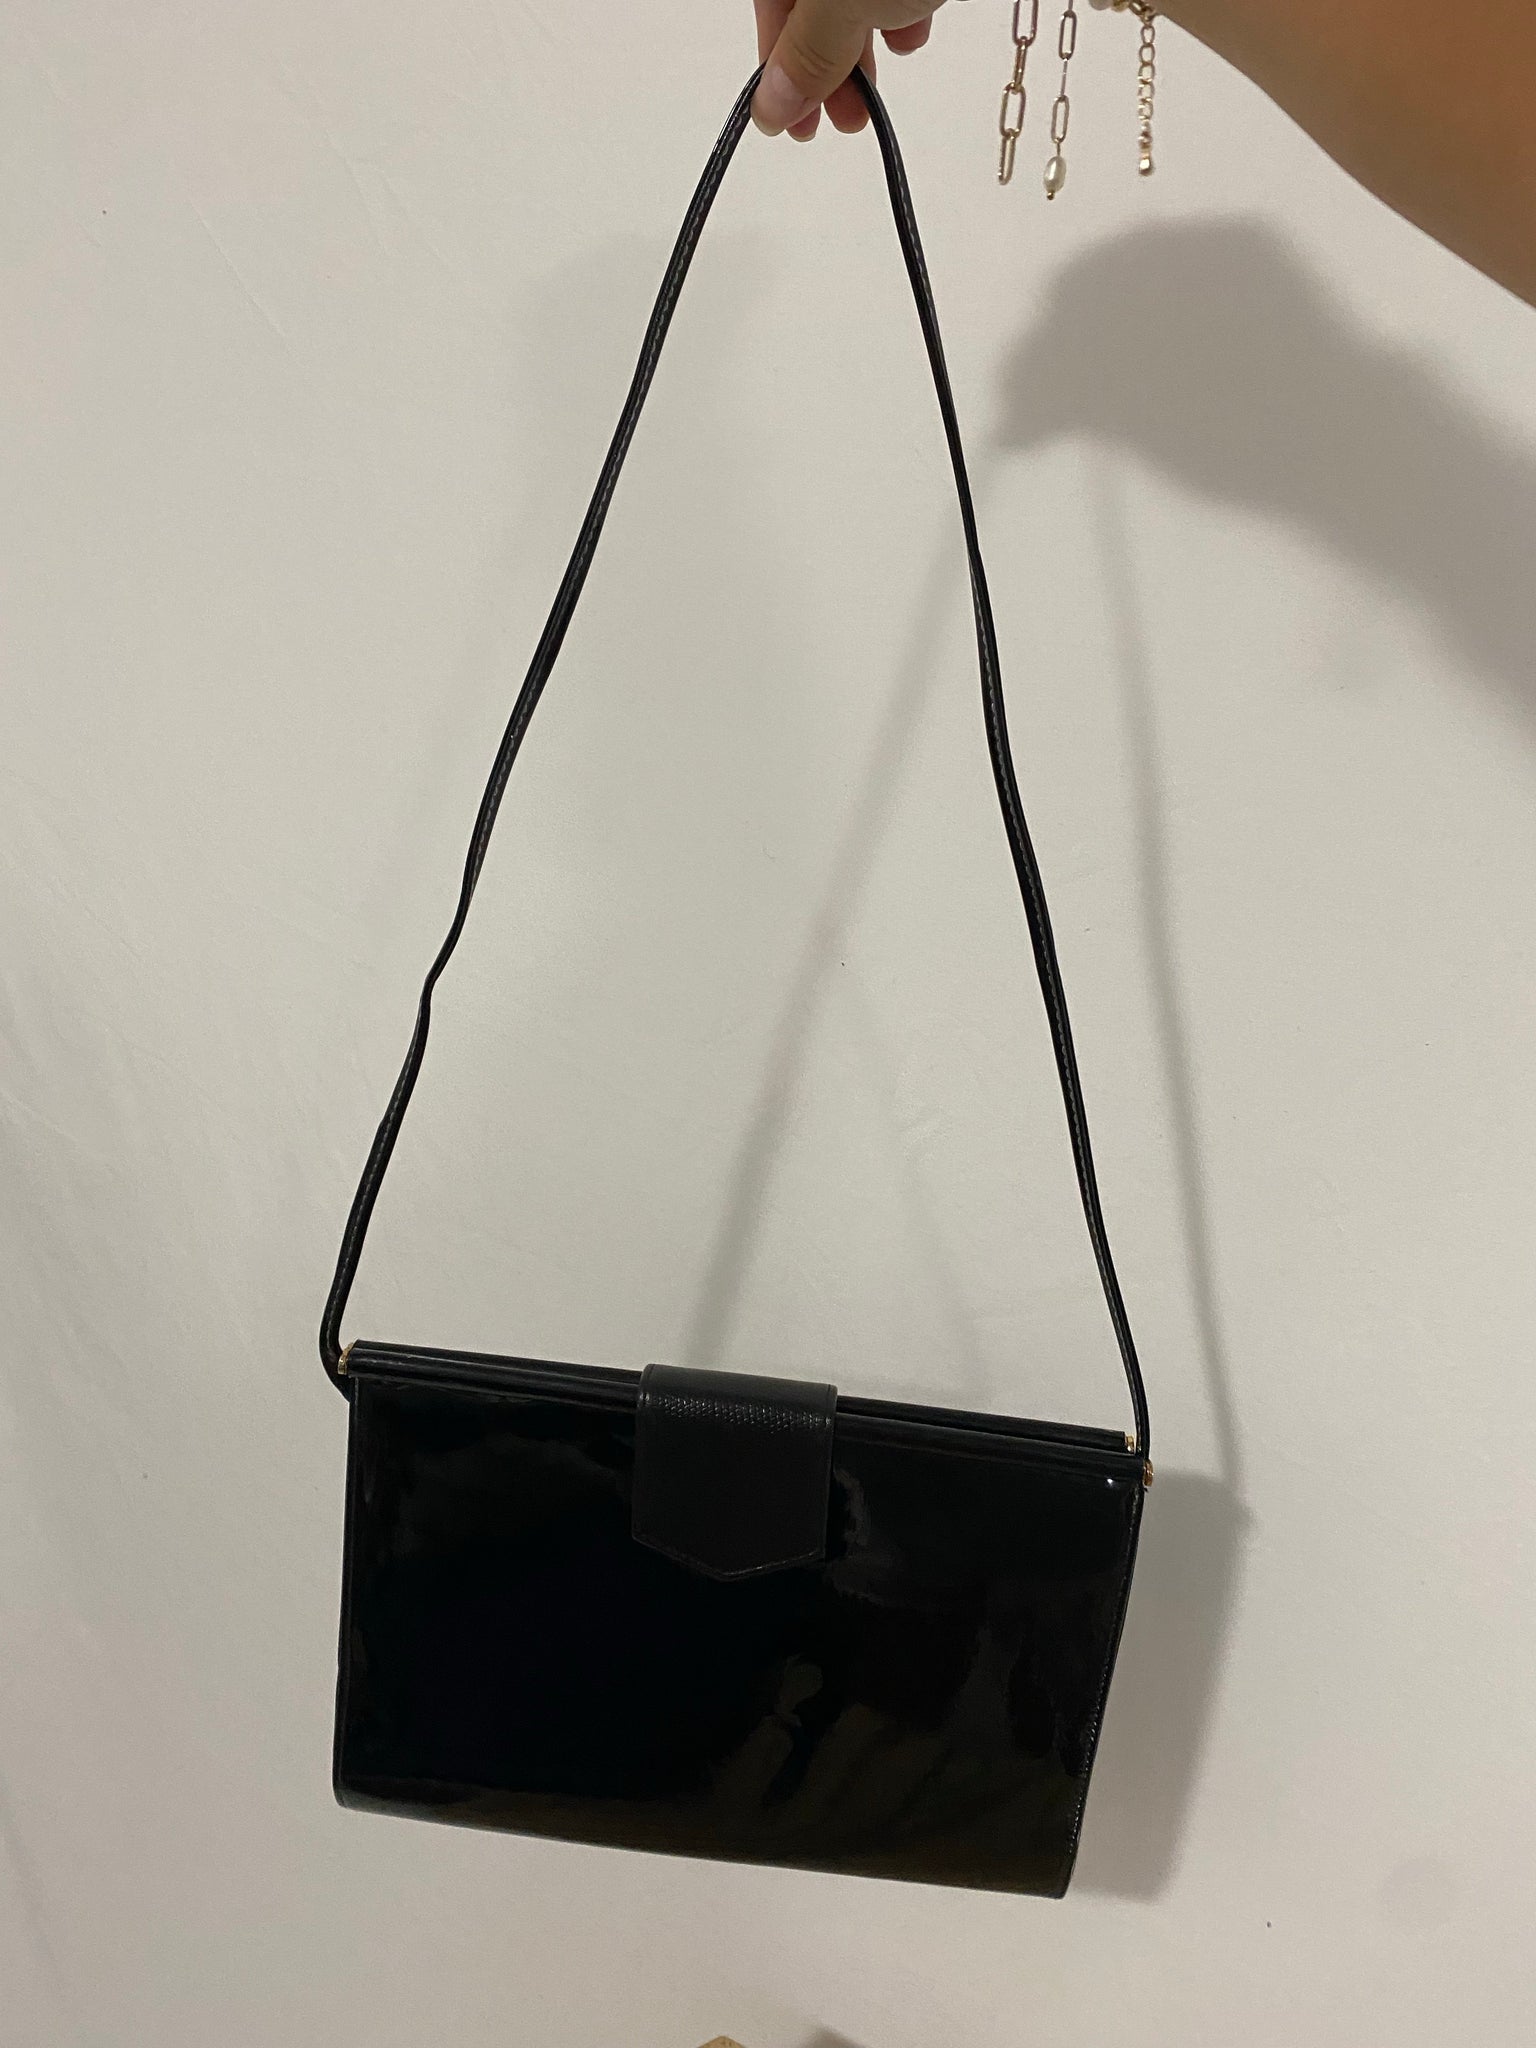 Black patent leather purse and clutch with leather details